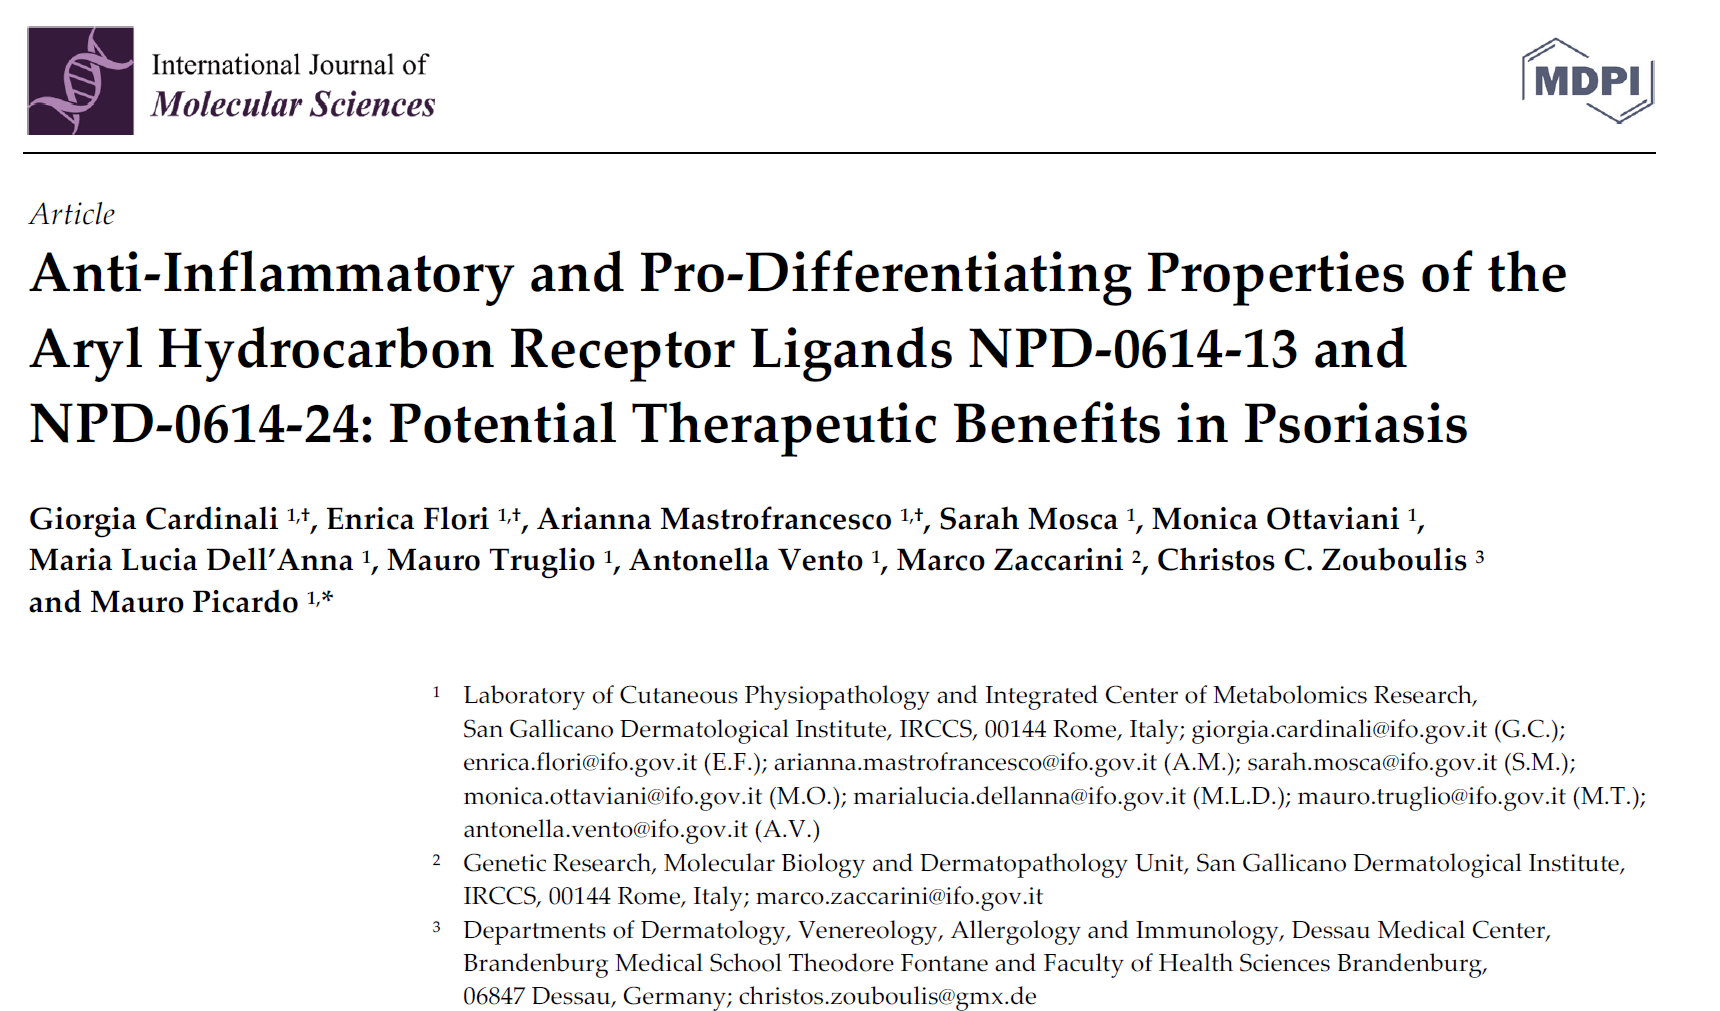 Anti-Inflammatory and Pro-Differentiating Properties of the Aryl Hydrocarbon Receptor Ligands NPD-0614-13 and NPD-0614-24: Potential Therapeutic Benefits in Psoriasis